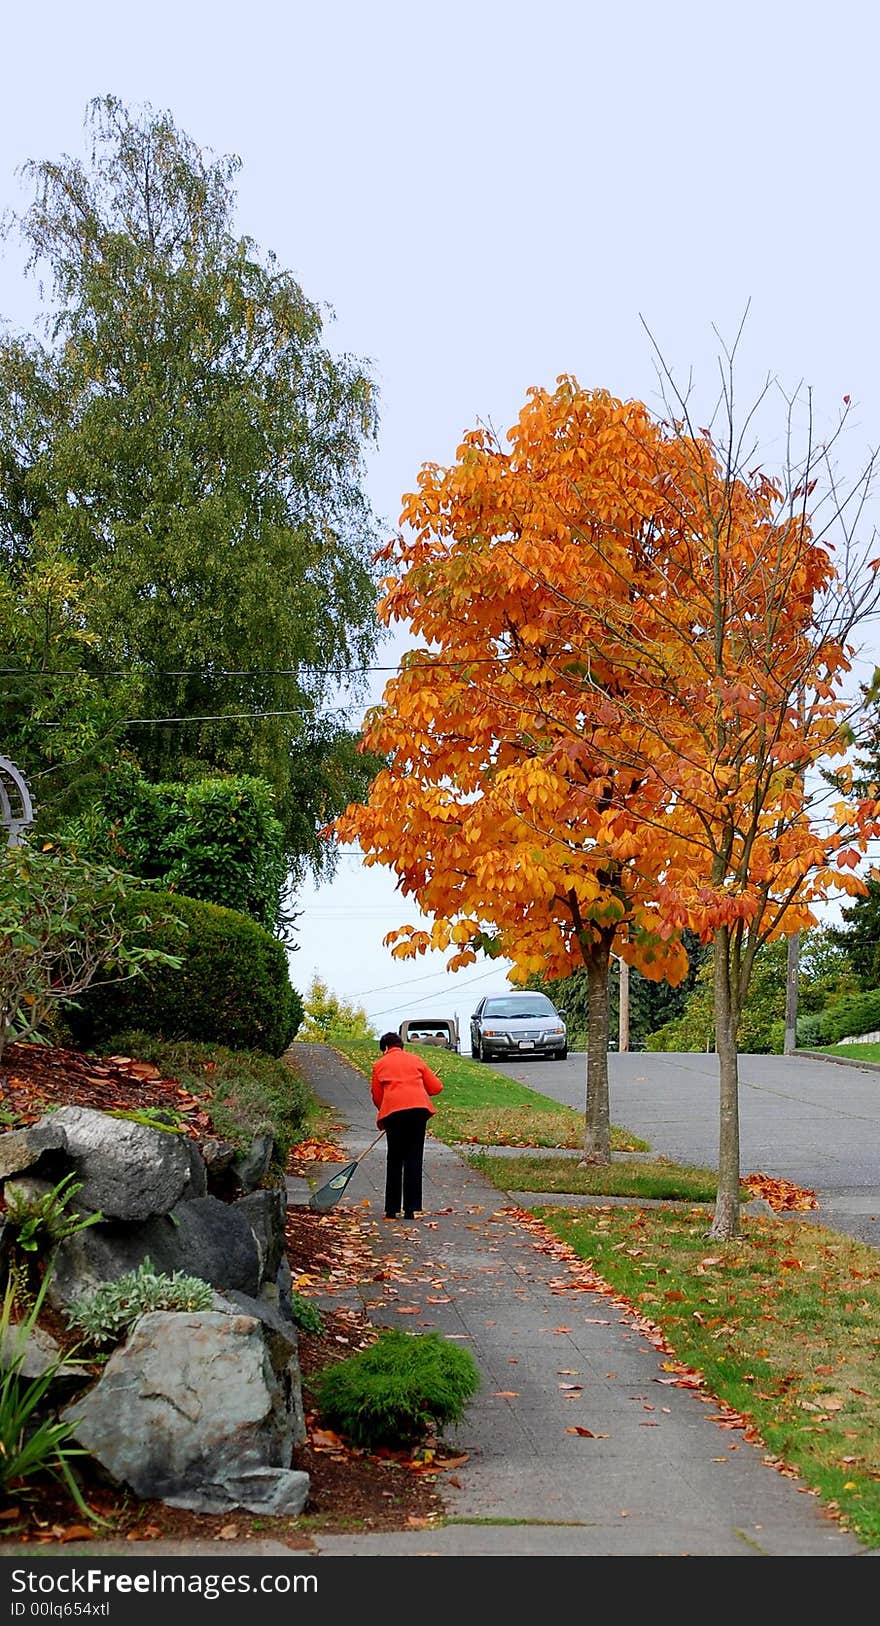 A woman is sweeping her sidewalk in autumn. A woman is sweeping her sidewalk in autumn